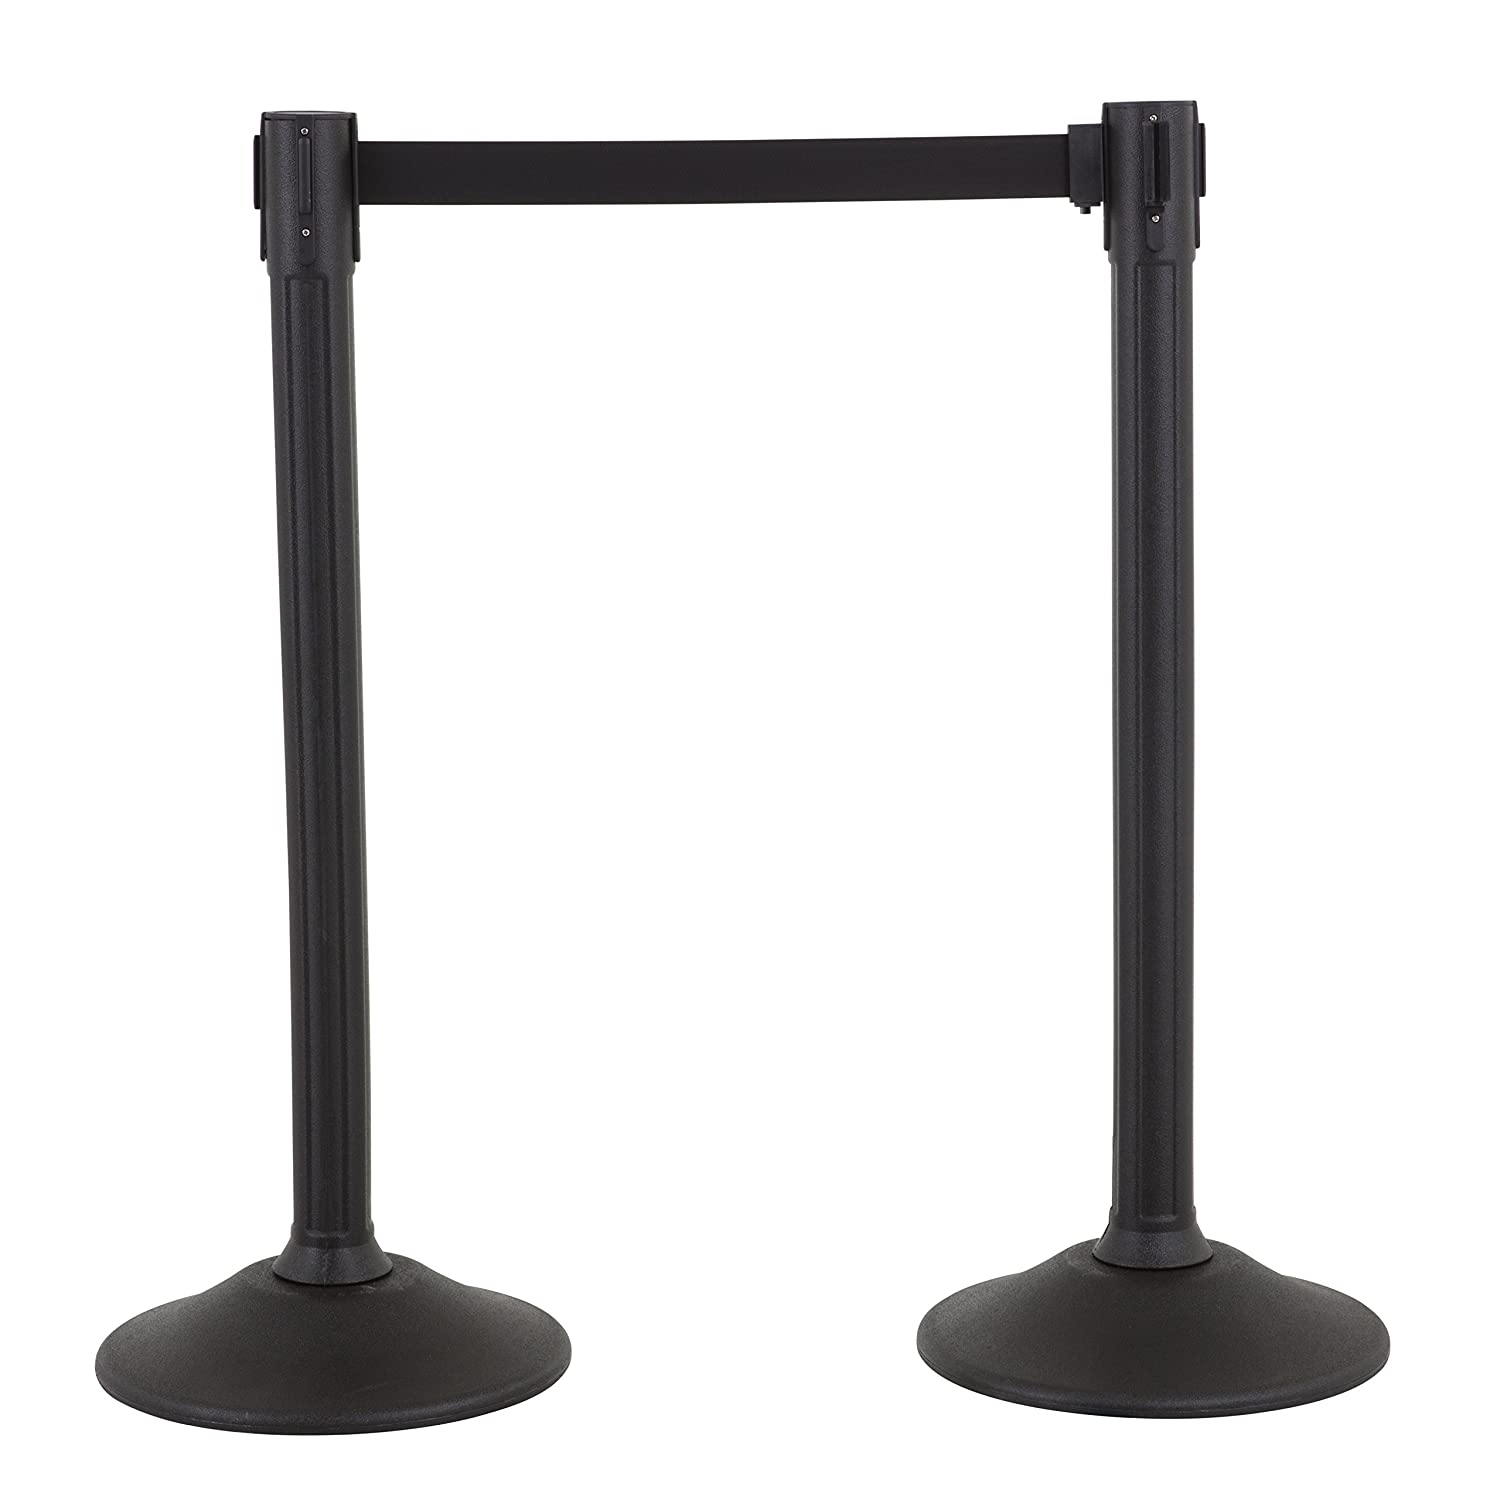 US Weight U2000 Sentry Stanchion with Retractable Belt - 2/pack